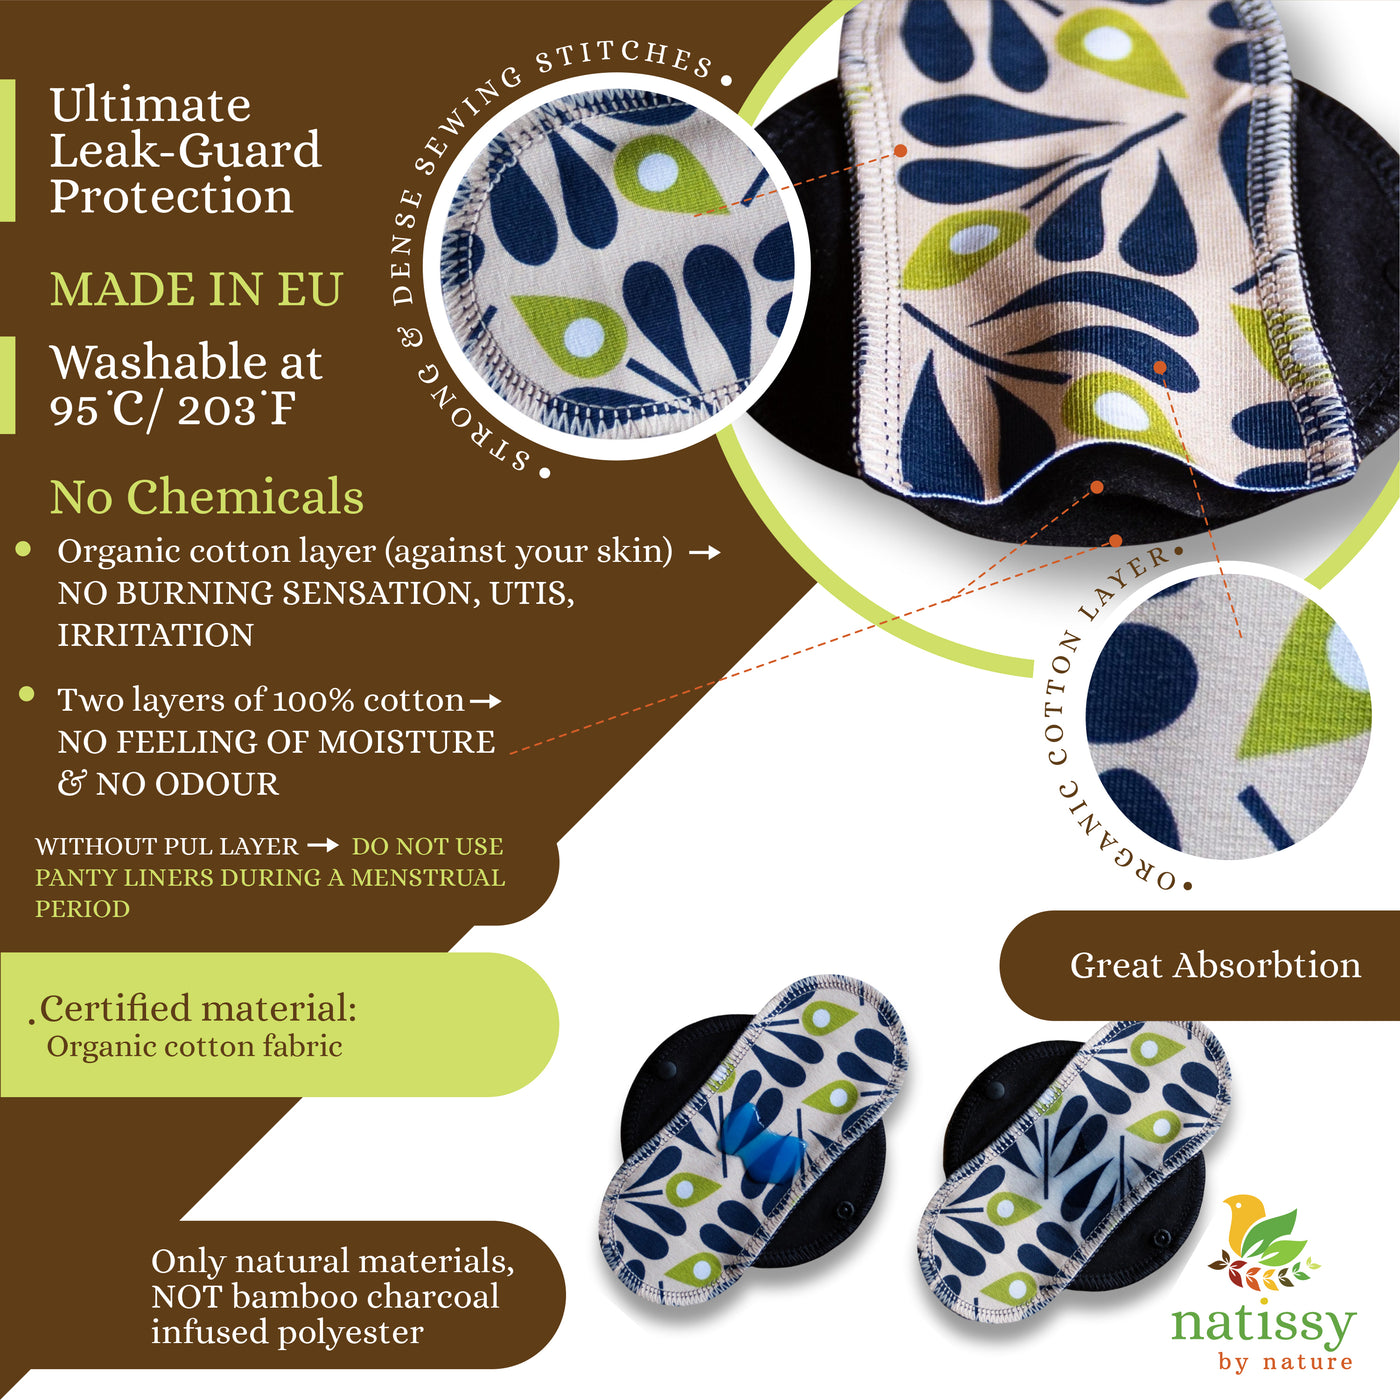 Reusable Panty liners, 7-Pack of Organic Cotton Reusable Sanitary Pantyliners with Black Wings; MADE IN EU; for Vaginal Discharge and Everyday Cleanliness; Non-irritating, Anti-allergic, Antibacterial; for Daily Usage and in case of White Discharge; Washable Cloth Pads w/o Chemicals; Reusable Liners